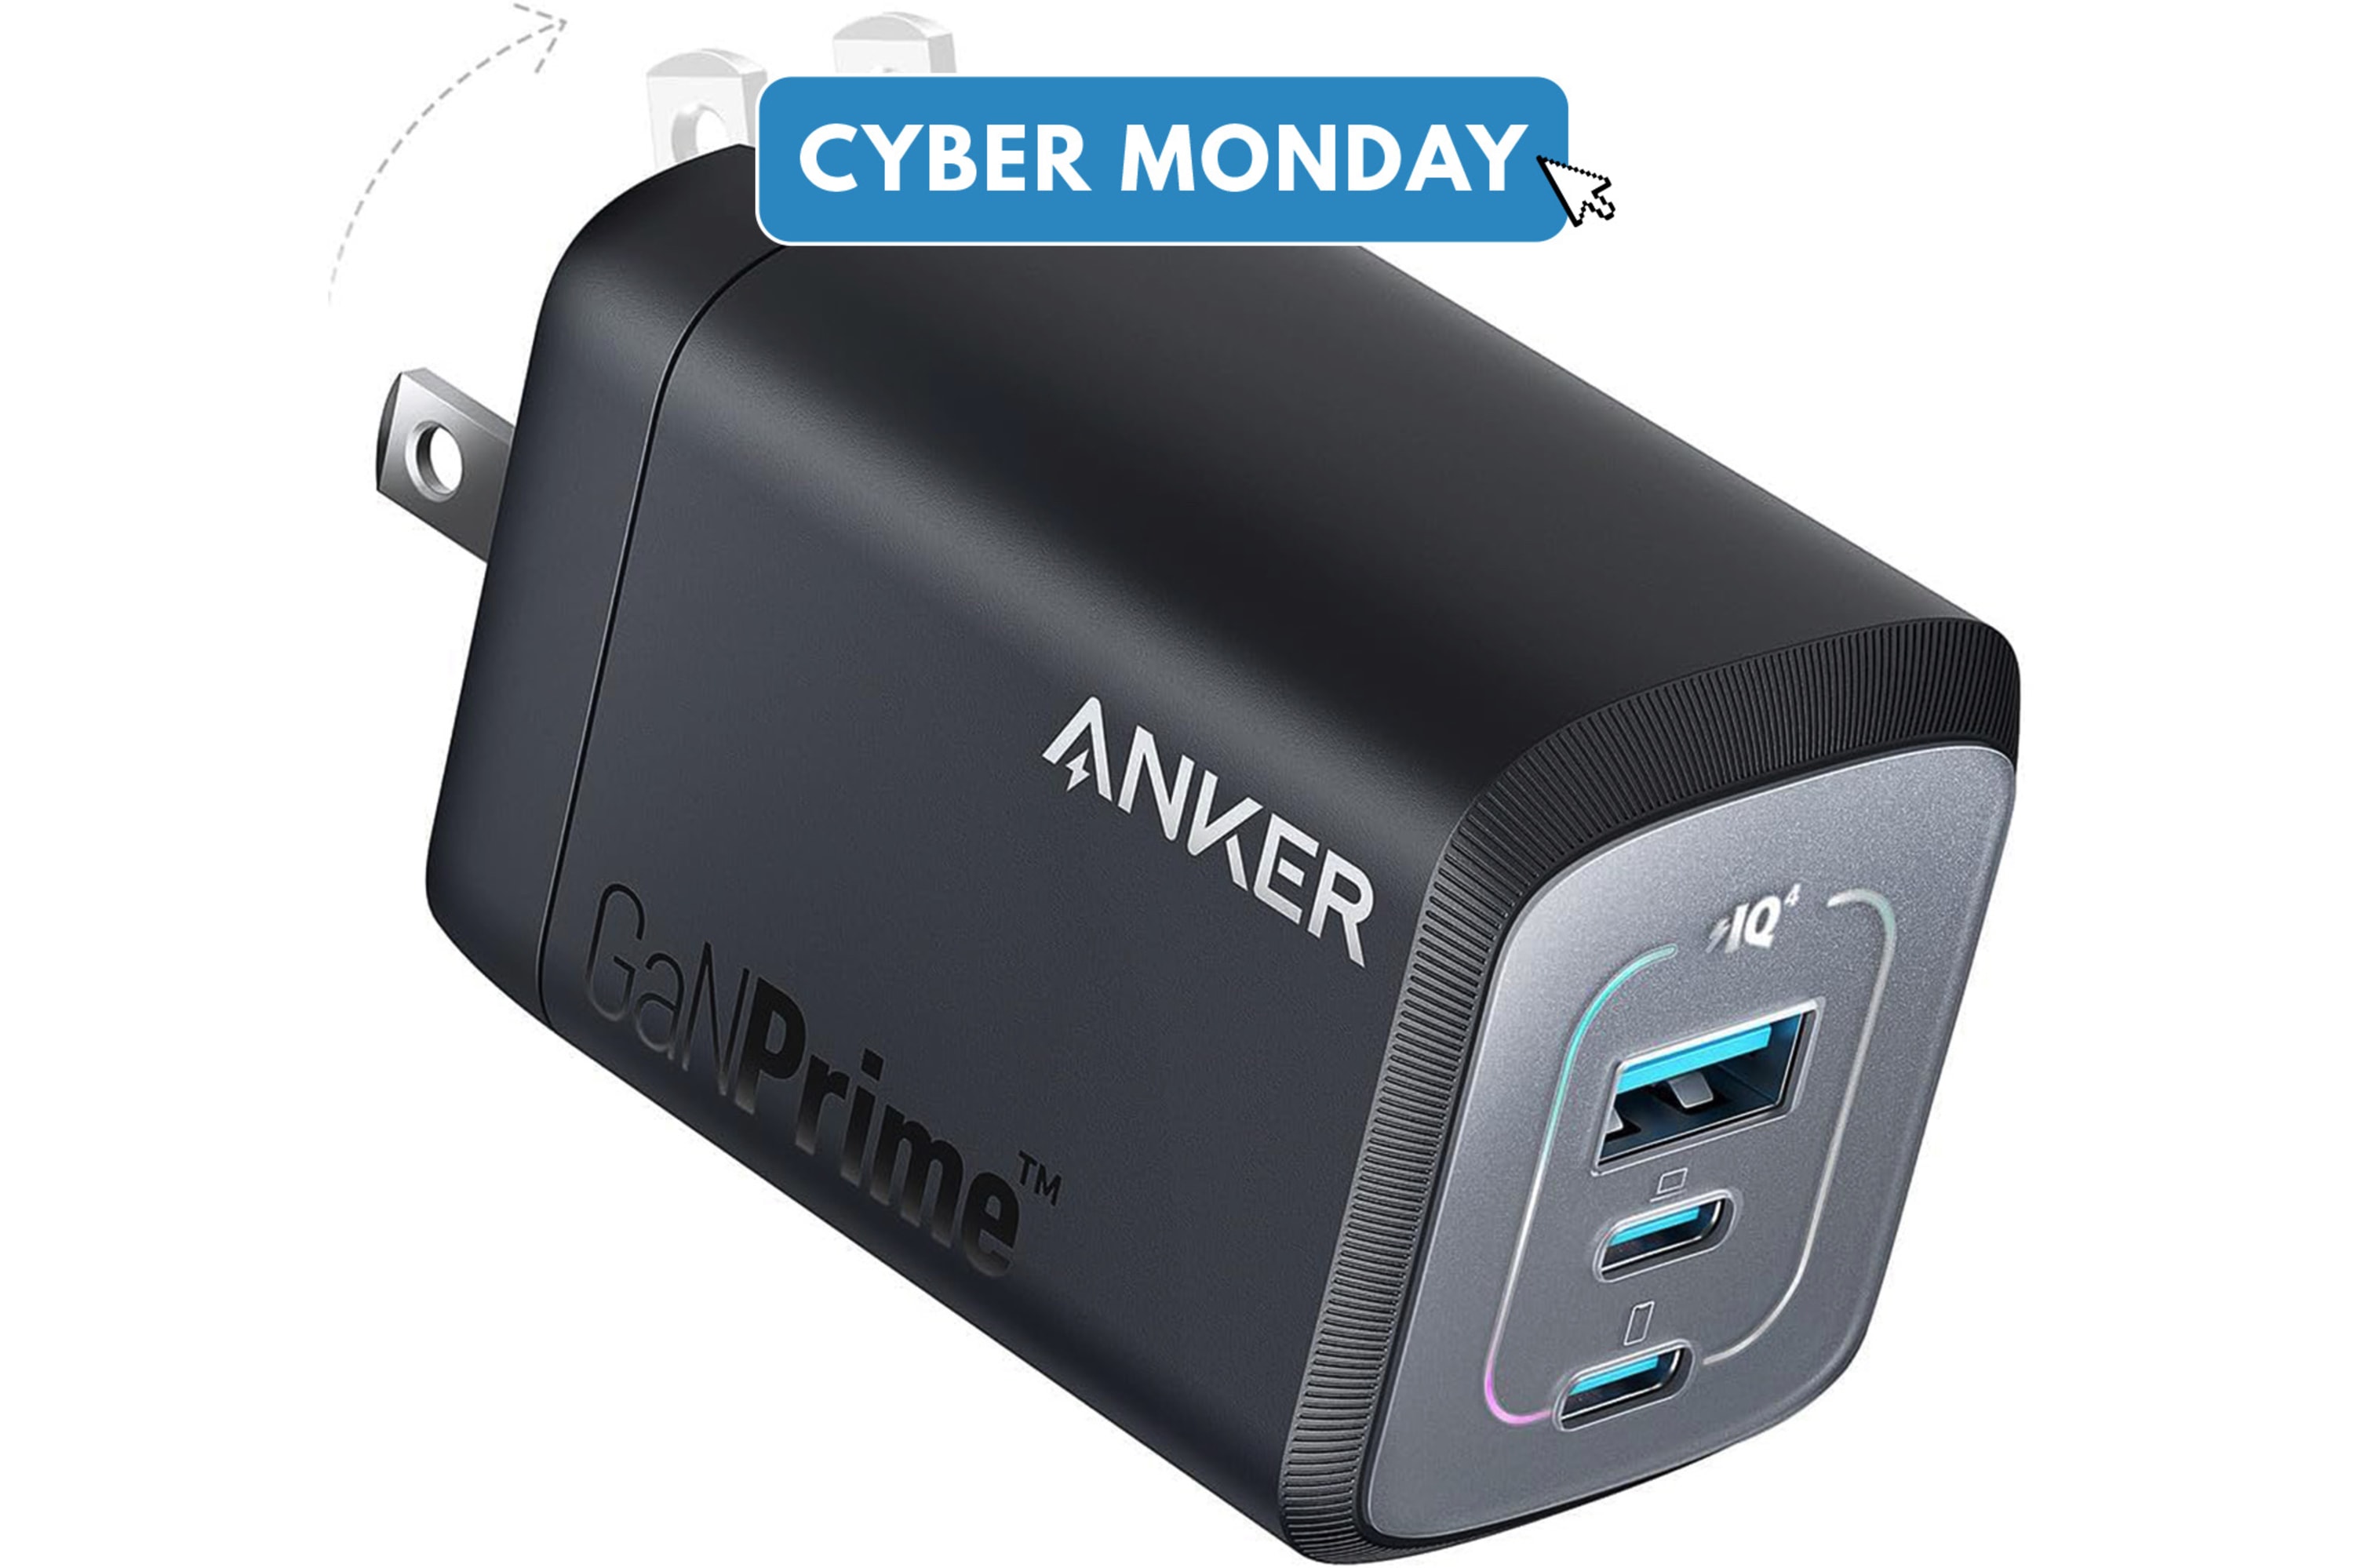 Anker Cyber Monday deals: Save up to 36 percent on chargers, cables, power banks and more